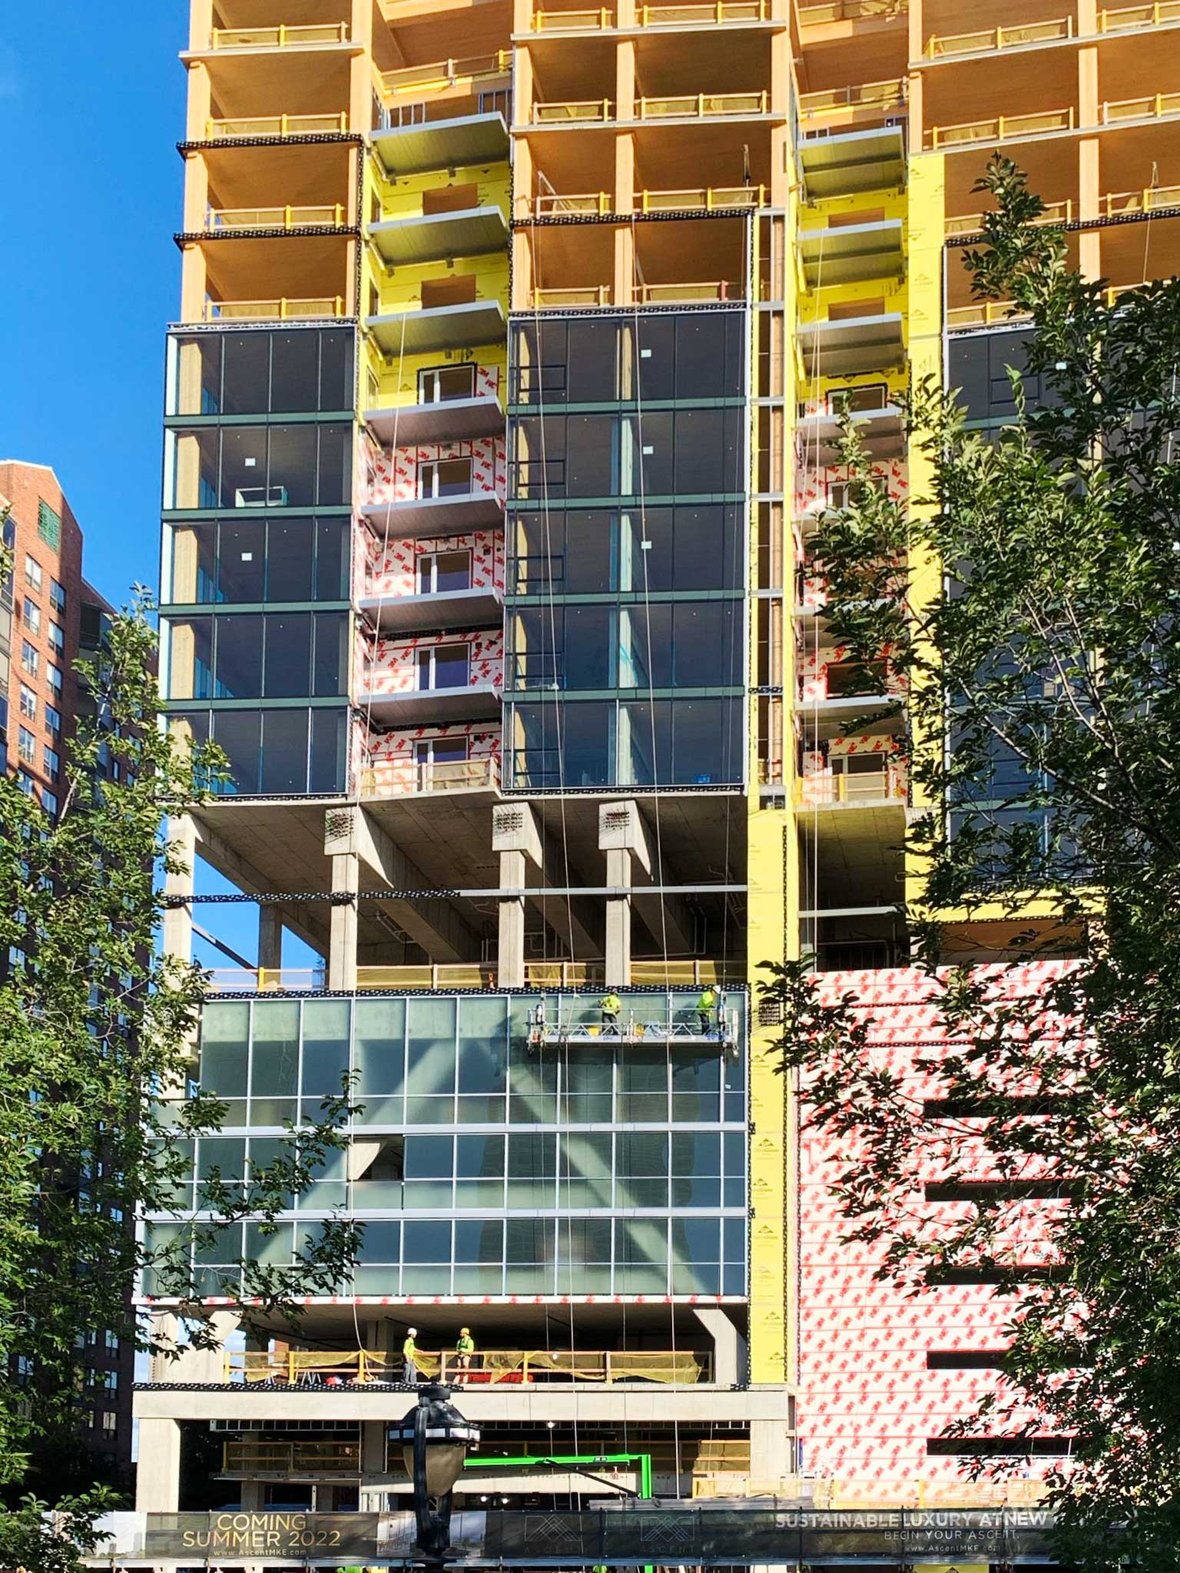 Glazing and curtain wall installation on lower stories of Ascent mass timber building construction in Milwaukee